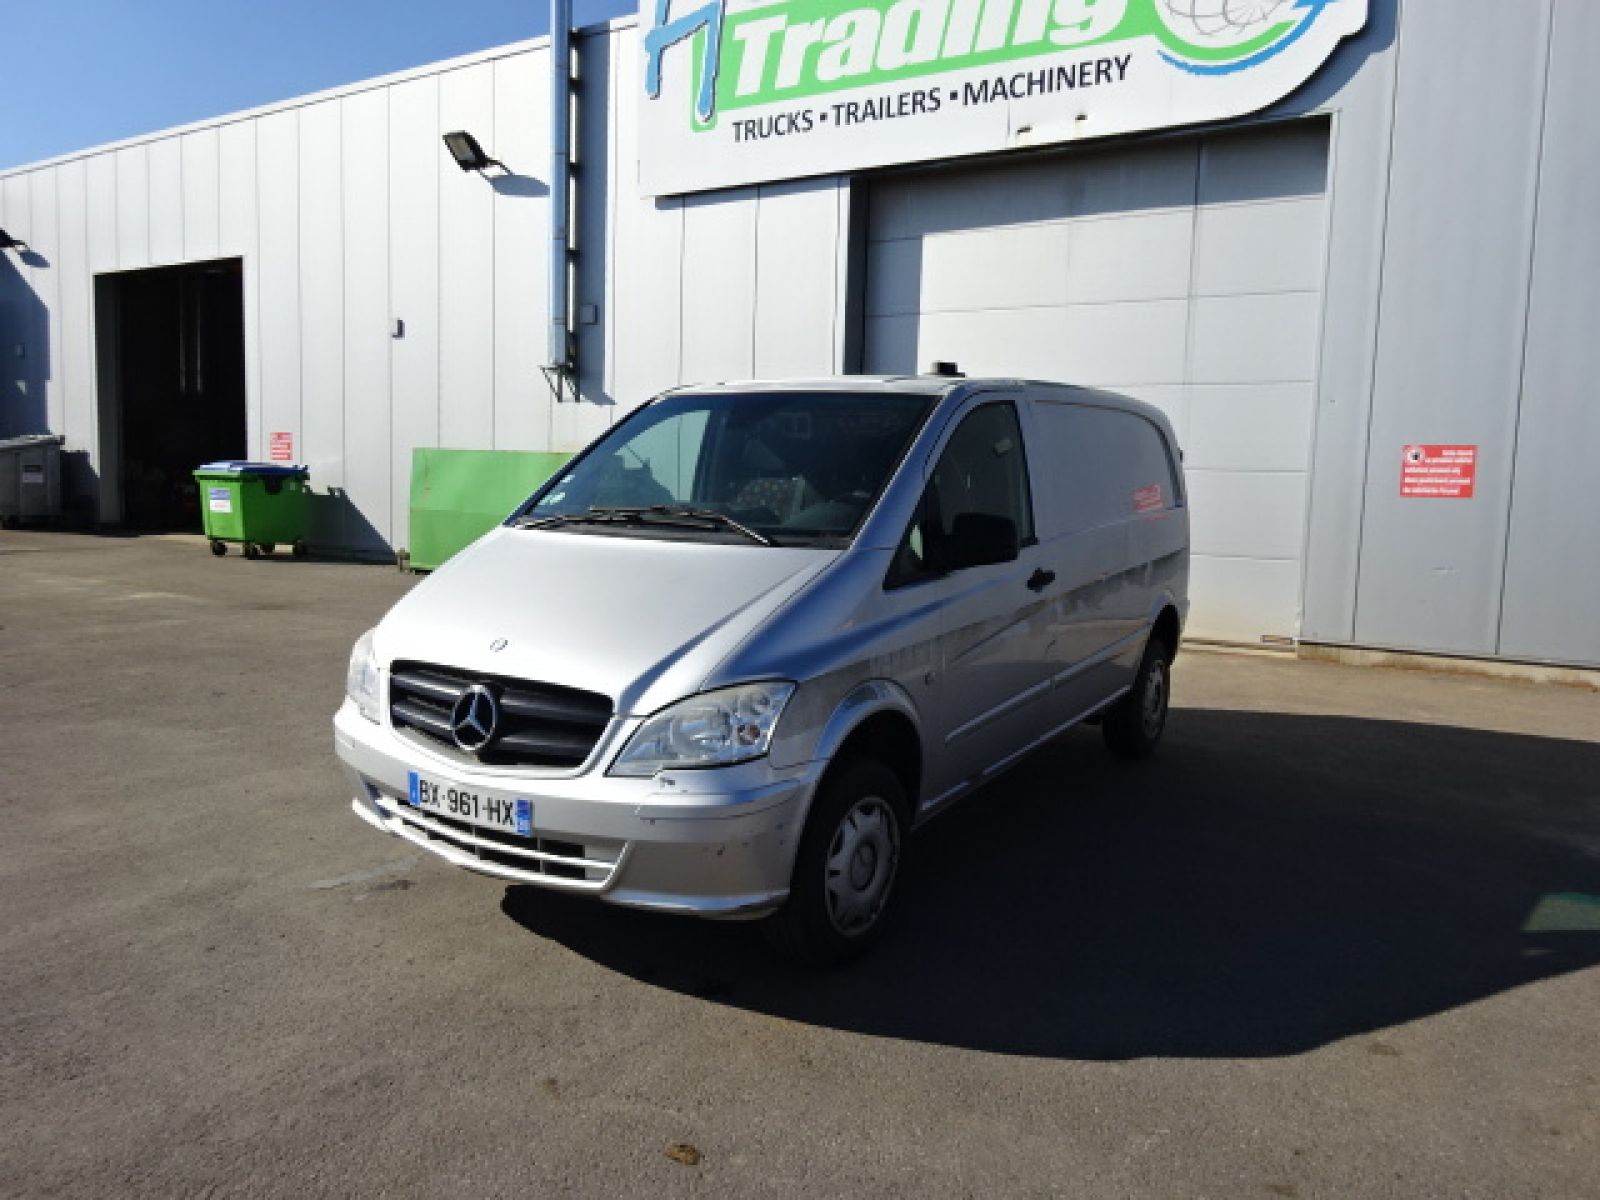 Vente occasion Divers - MERCEDES VITO 113 cdi 113 CDI Fourgonnette (Belgique - Europe) - Houffalize Trading s.a.